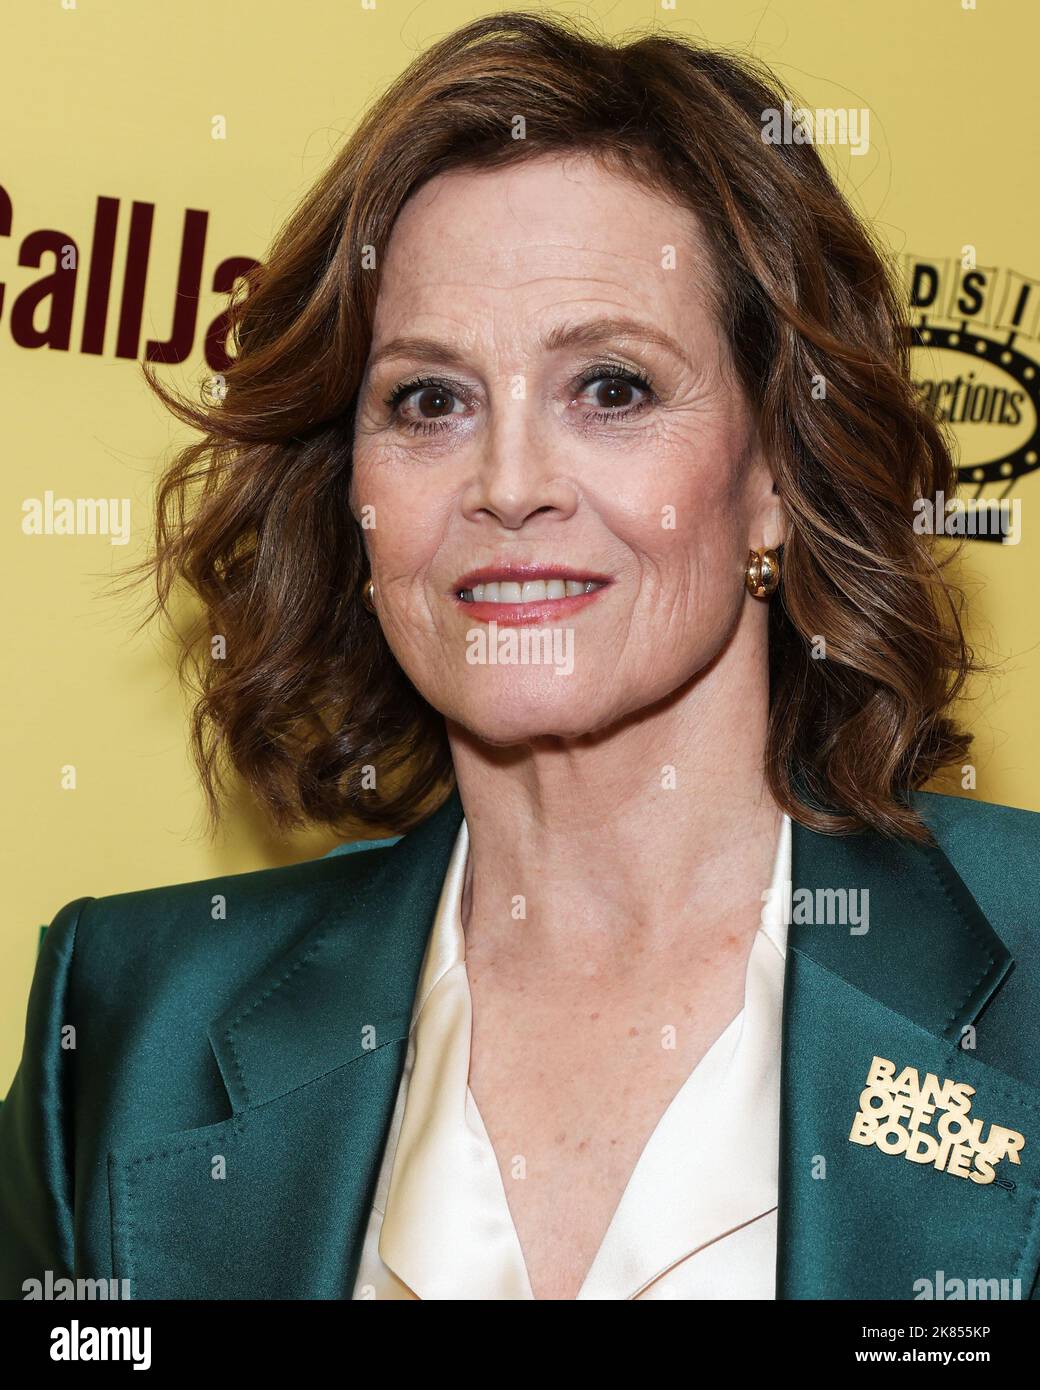 Los Angeles, USA. 20th Oct, 2022. LOS ANGELES, CALIFORNIA, USA - OCTOBER 20: American actress Sigourney Weaver arrives at the Los Angeles Premiere Of Roadside Attractions' 'Call Jane' held at the Skirball Cultural Center on October 20, 2022 in Los Angeles, California, USA. (Photo by Xavier Collin/Image Press Agency) Credit: Image Press Agency/Alamy Live News Stock Photo